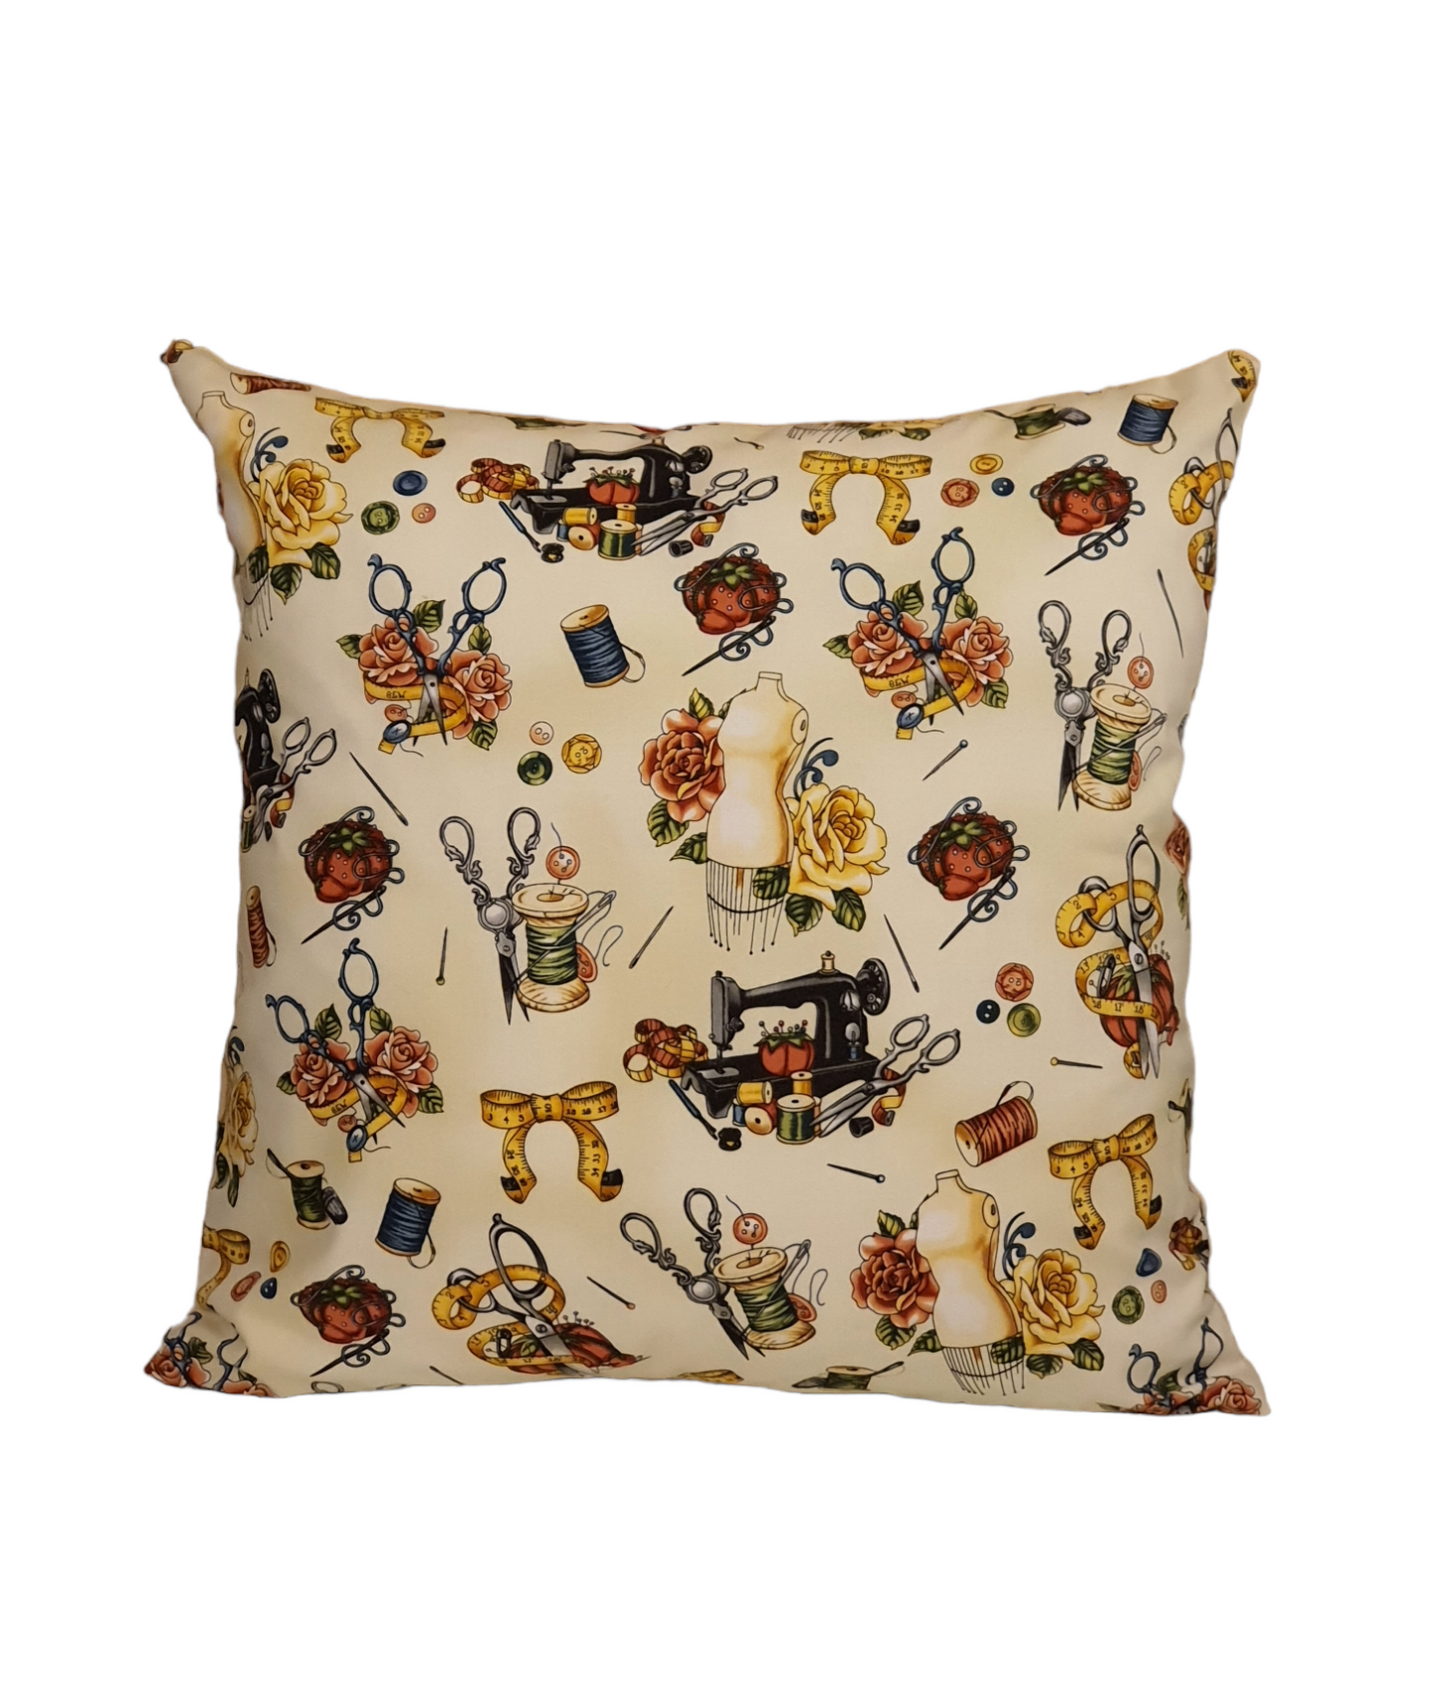 Vintage Couturier - Handmade Cushion Cover (17"x17")